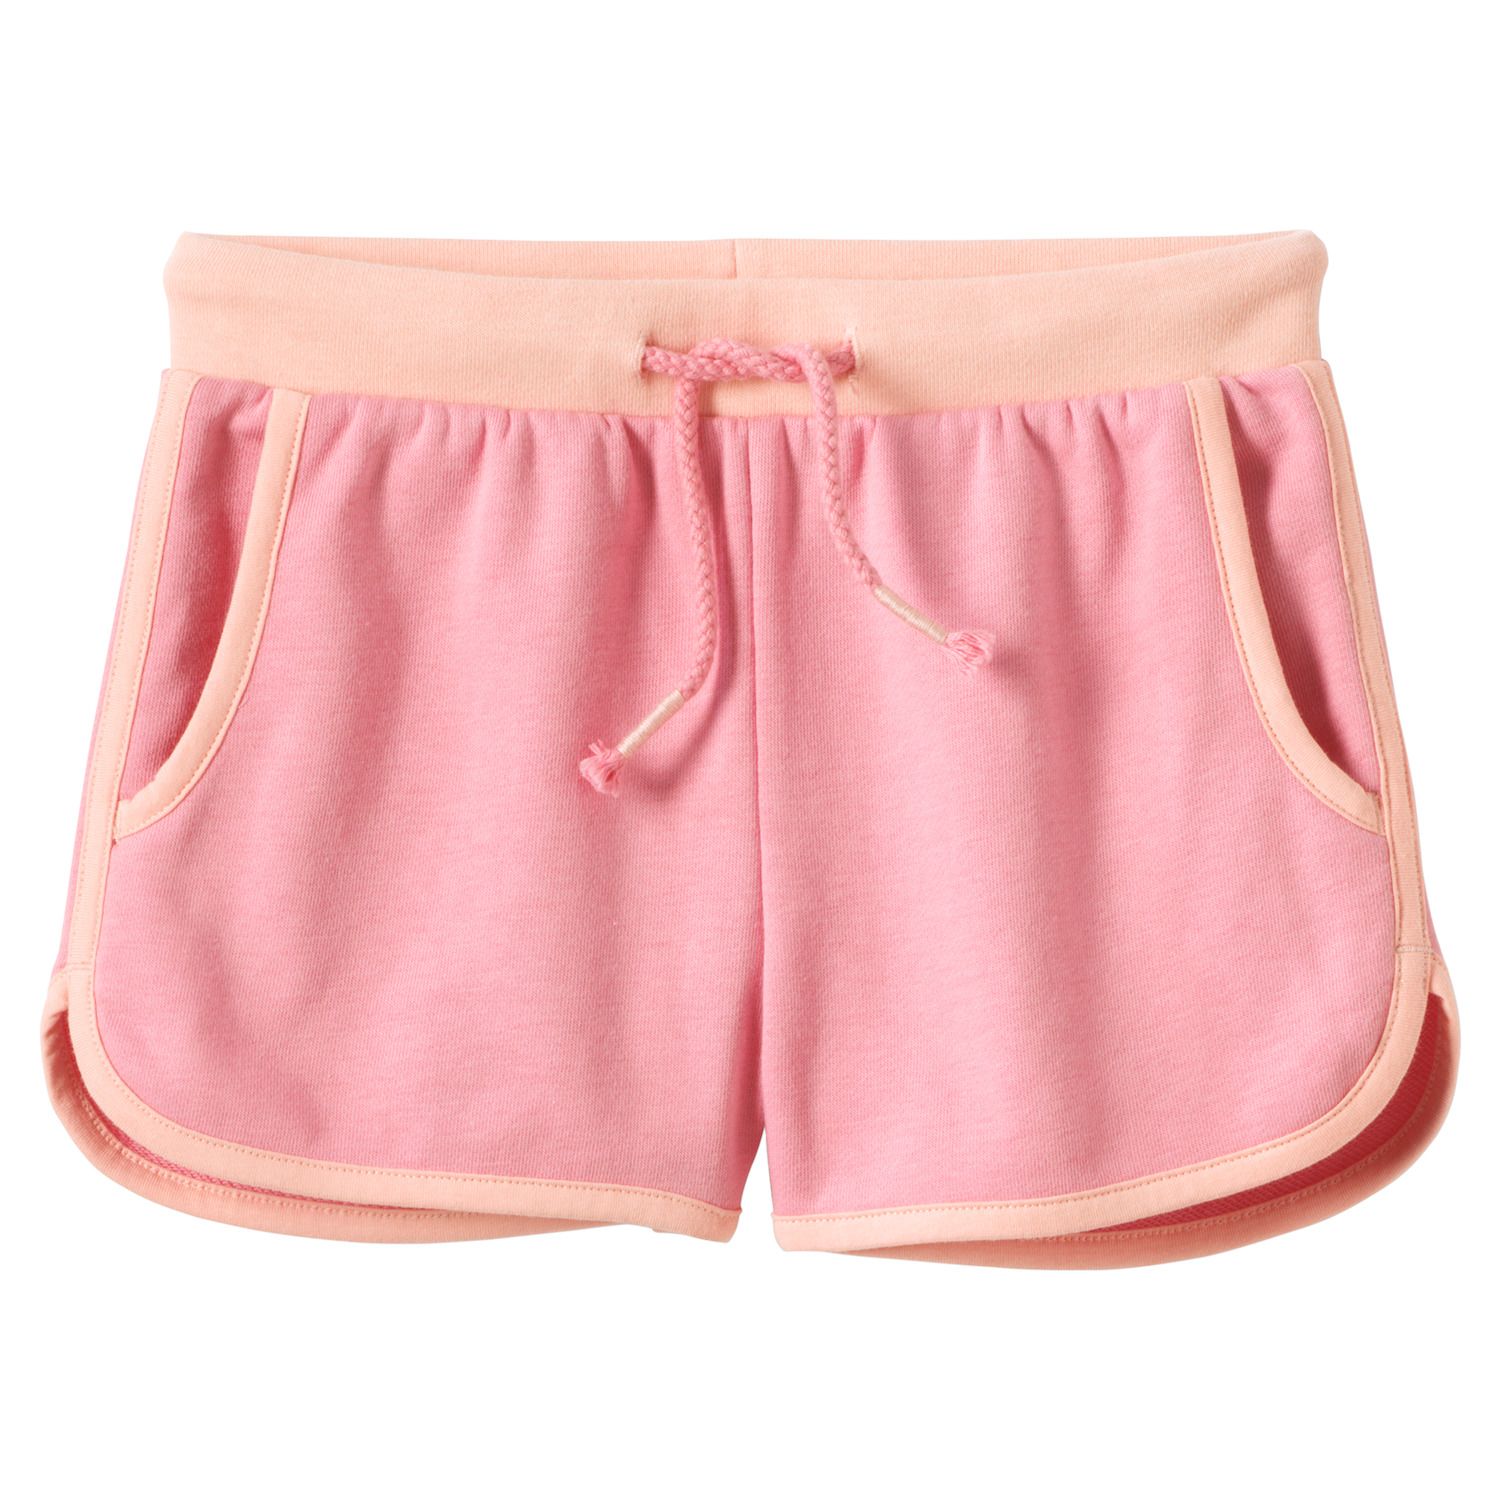 Image for Lands' End Girls 7-16 French Terry Shorts in Plus Size at Kohl's.